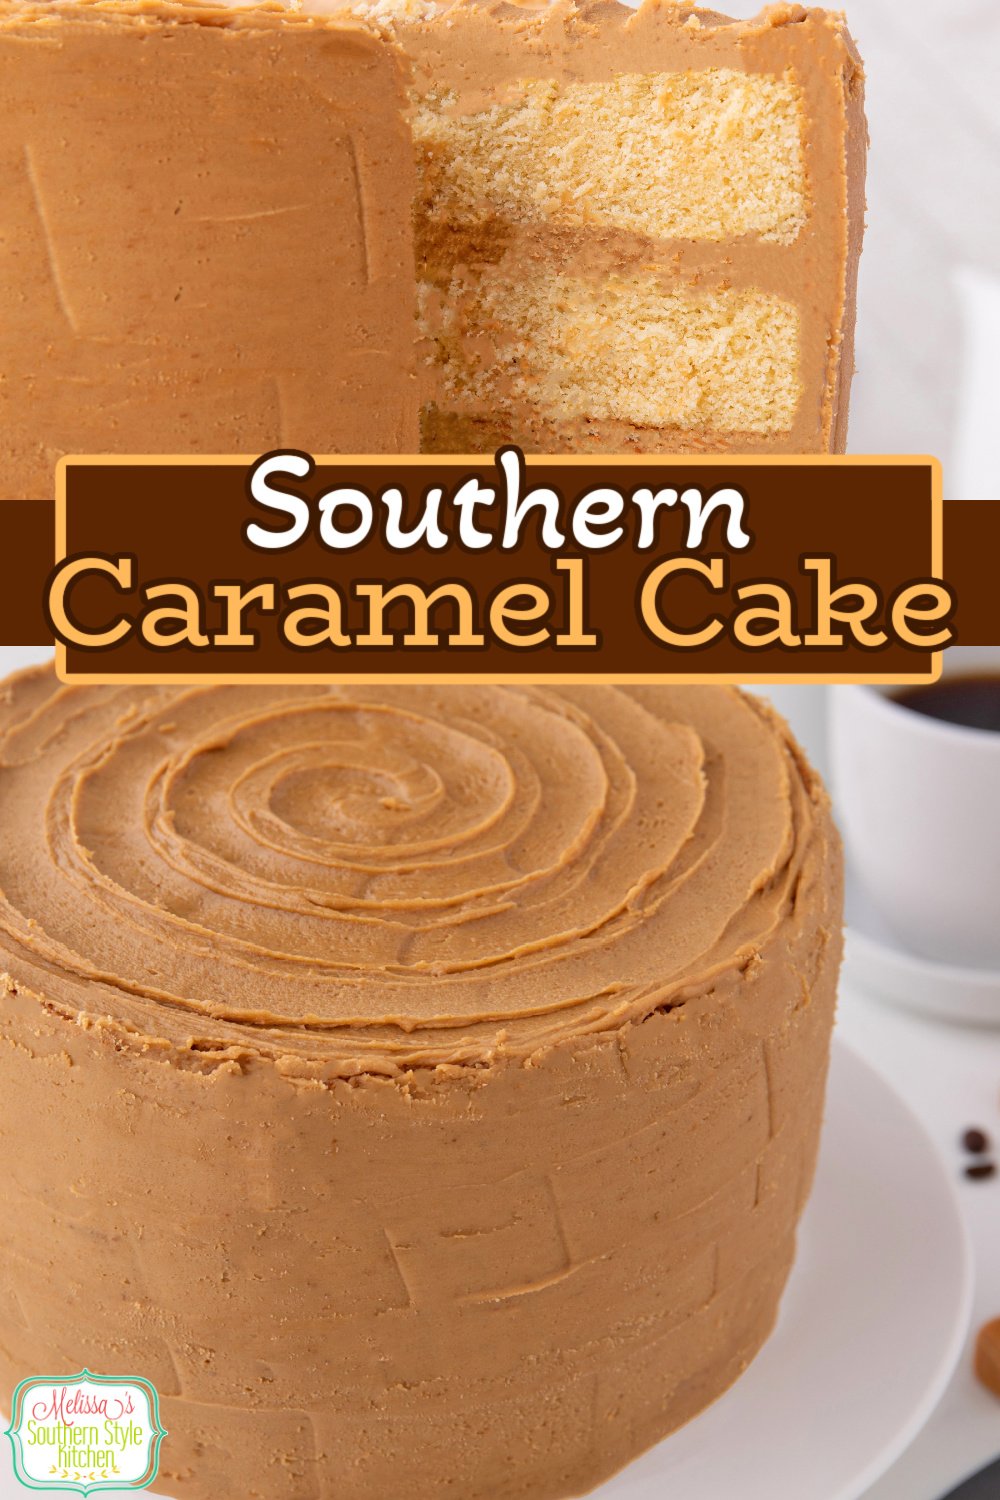 This buttery homemade Southern Caramel Cake features three cake layers frosted with a rich caramel frosting. #caramelcake #southerncaramelcake #cakes #cakerecipes #southerndesserts #carmamelfrosting #caramelicing via @melissasssk